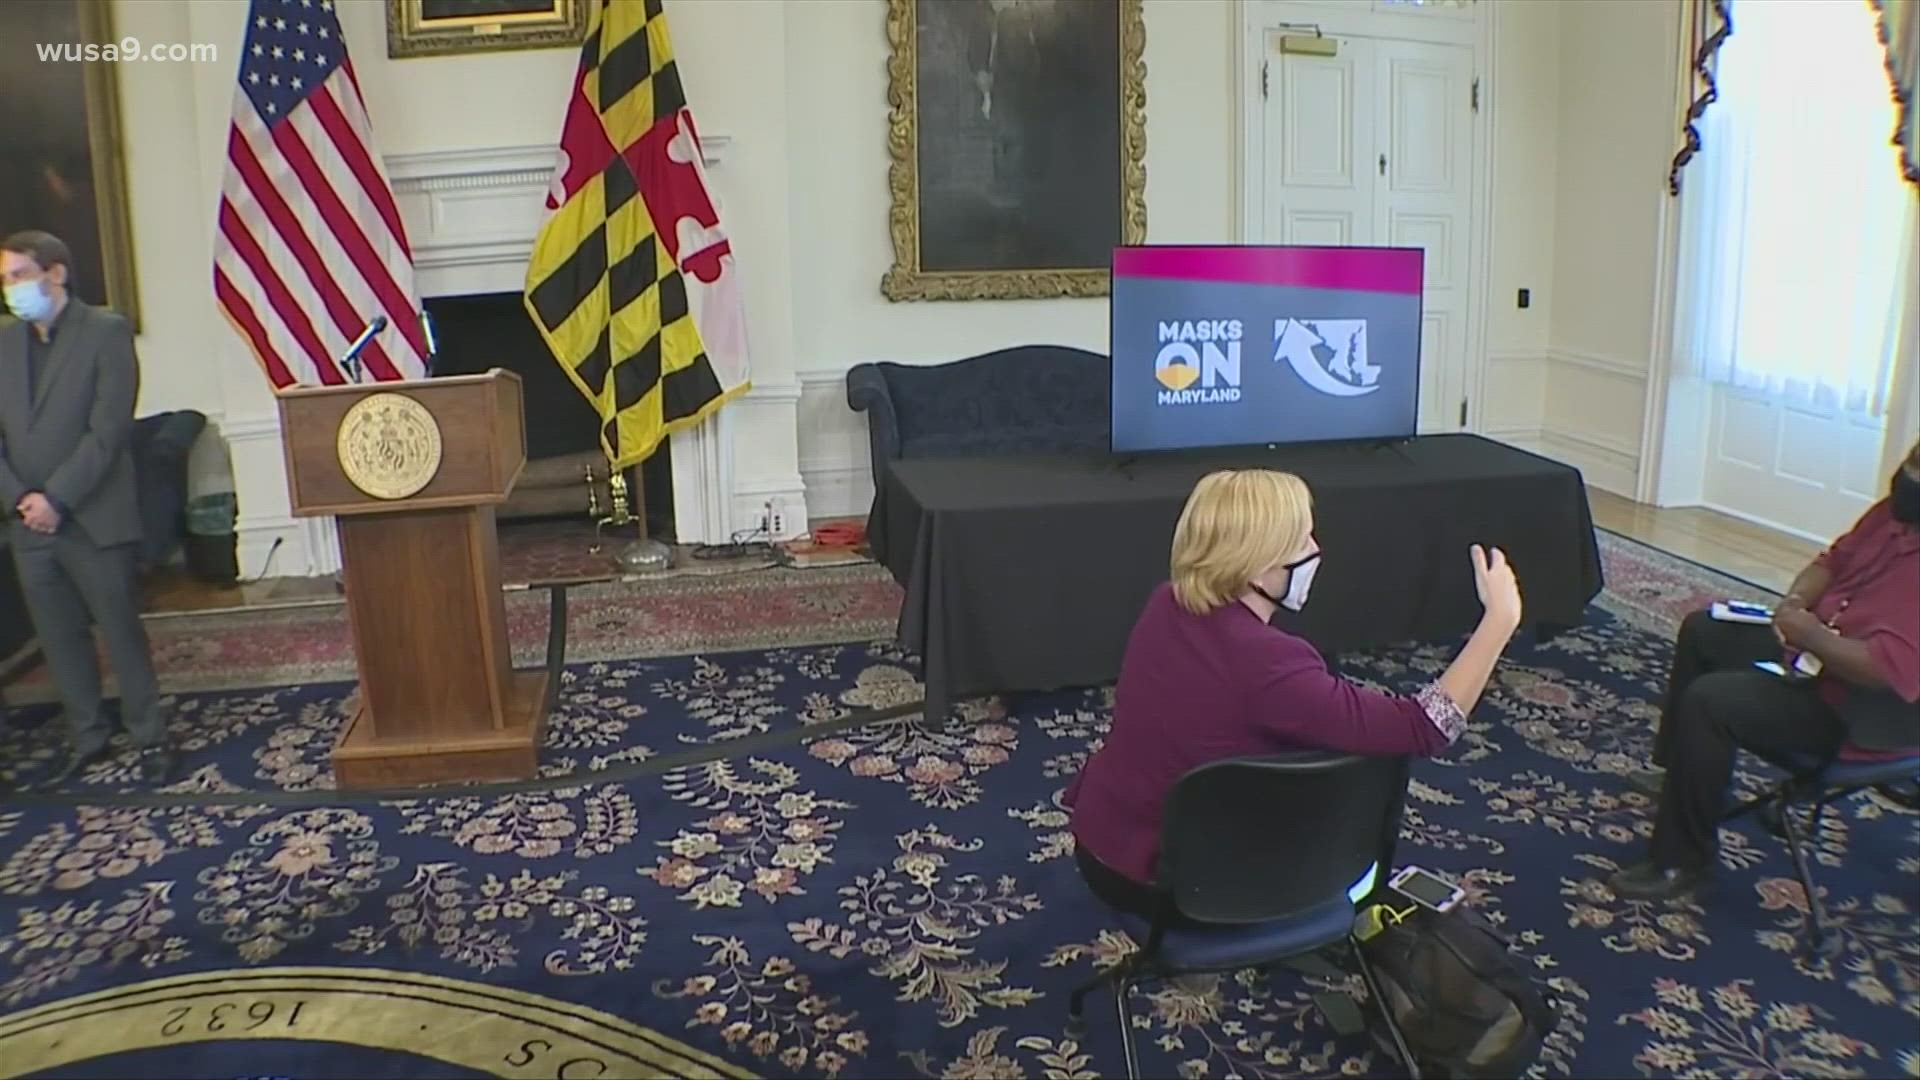 The state's hospitalizations are sharply increasing. Gov. Hogan provides live updates on Maryland's health and economic recovery.